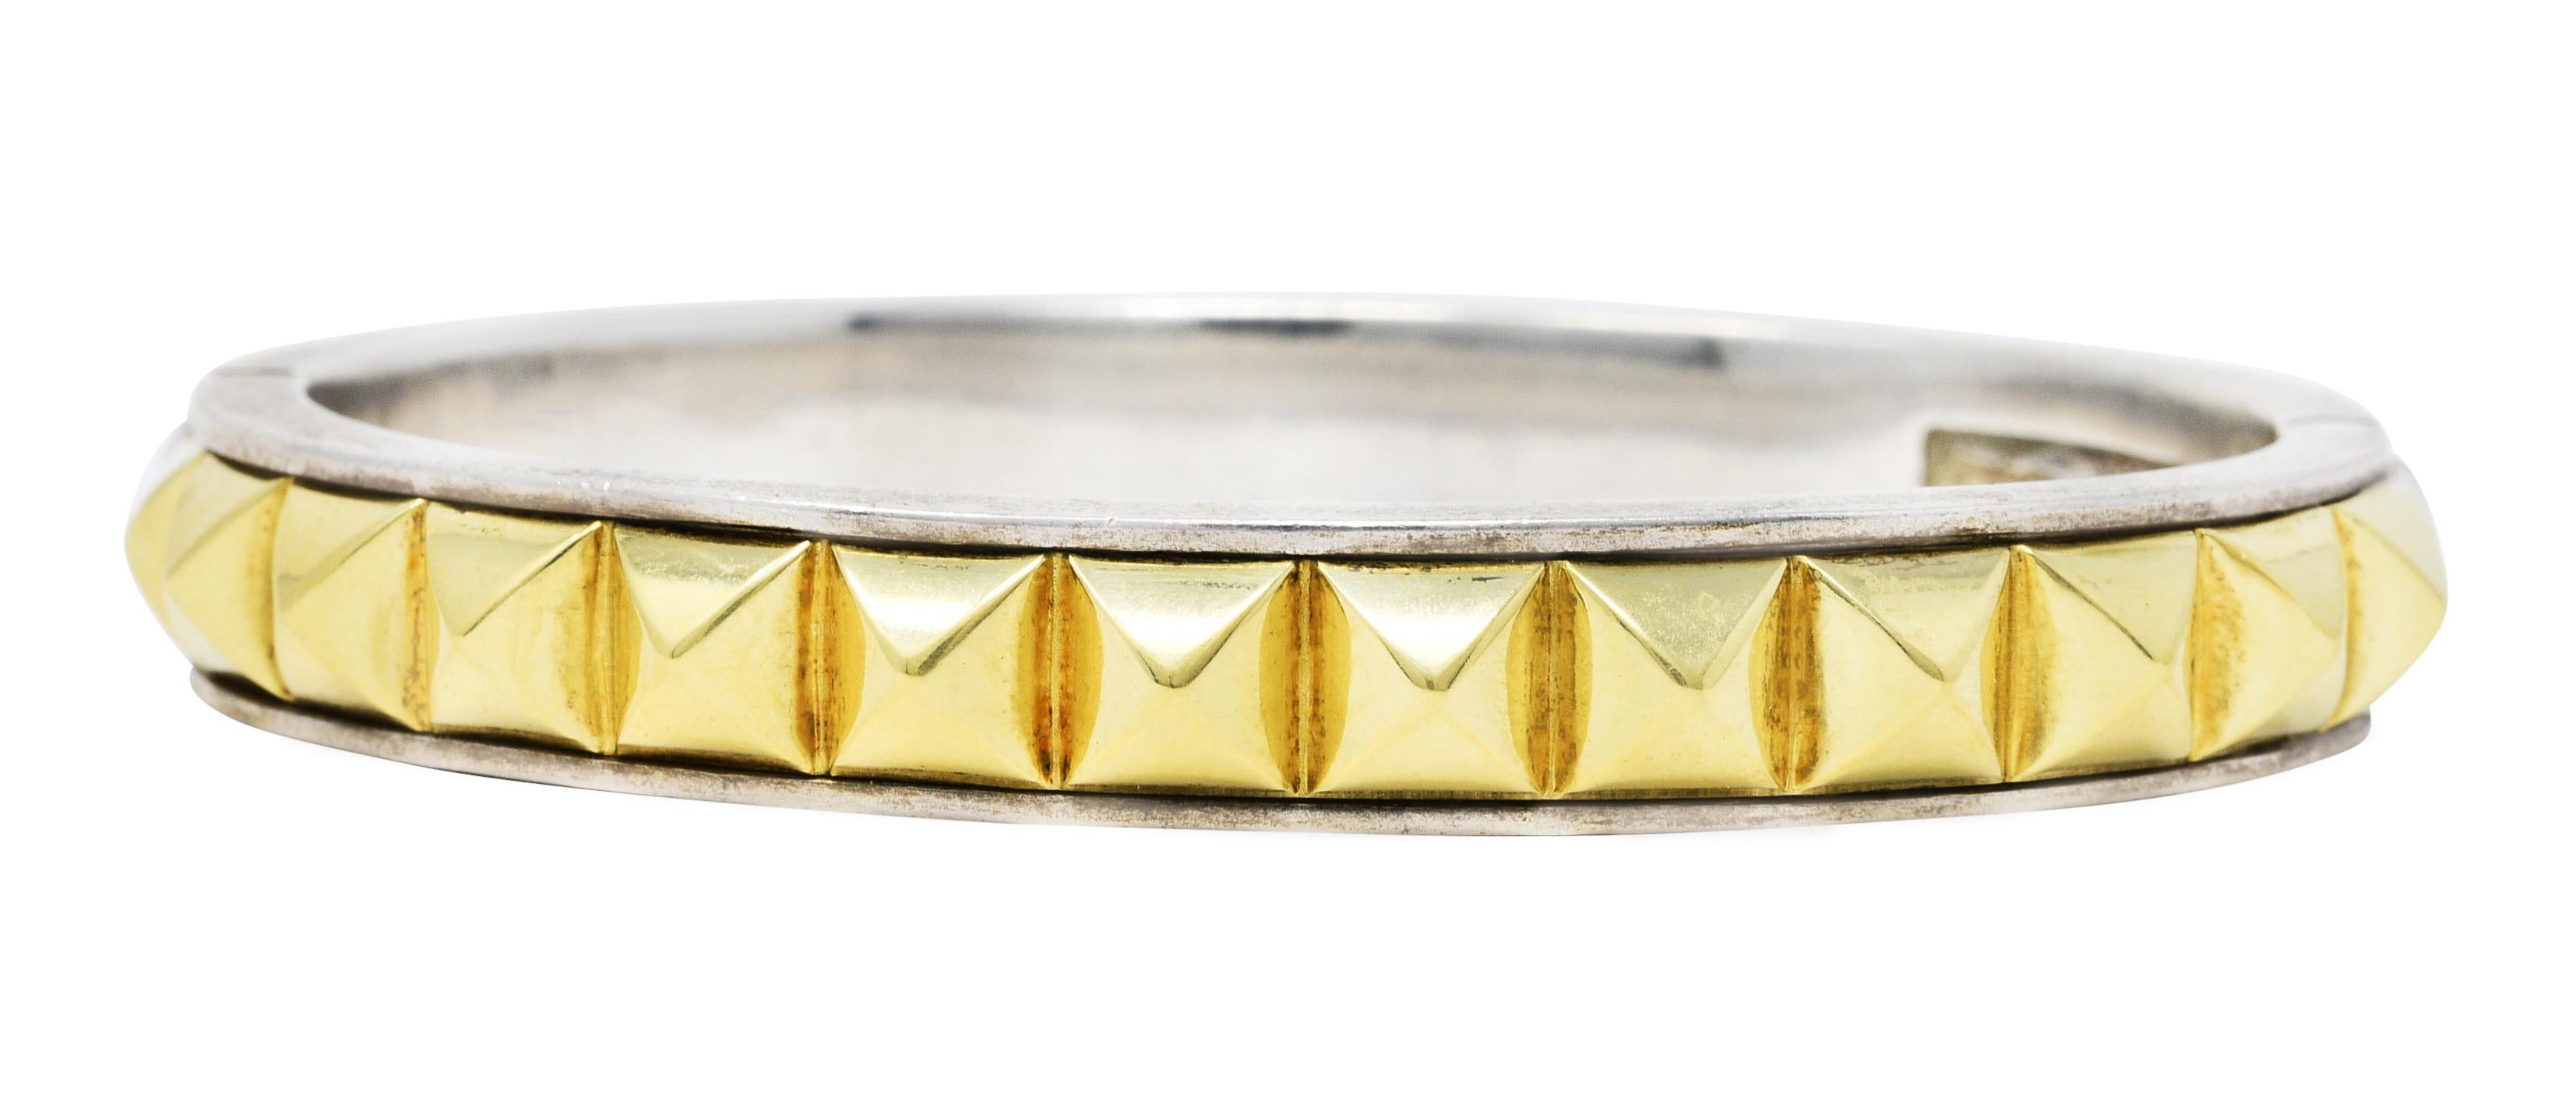 Bangle style bracelet with gold and silver pyramid studs completely around 

Opens on a hinge via presser and slide mechanism

Stamped 750 and 925 for 18 karat gold and sterling silver, respectively

Signed Caviar for Lagos

Caviar Collection -